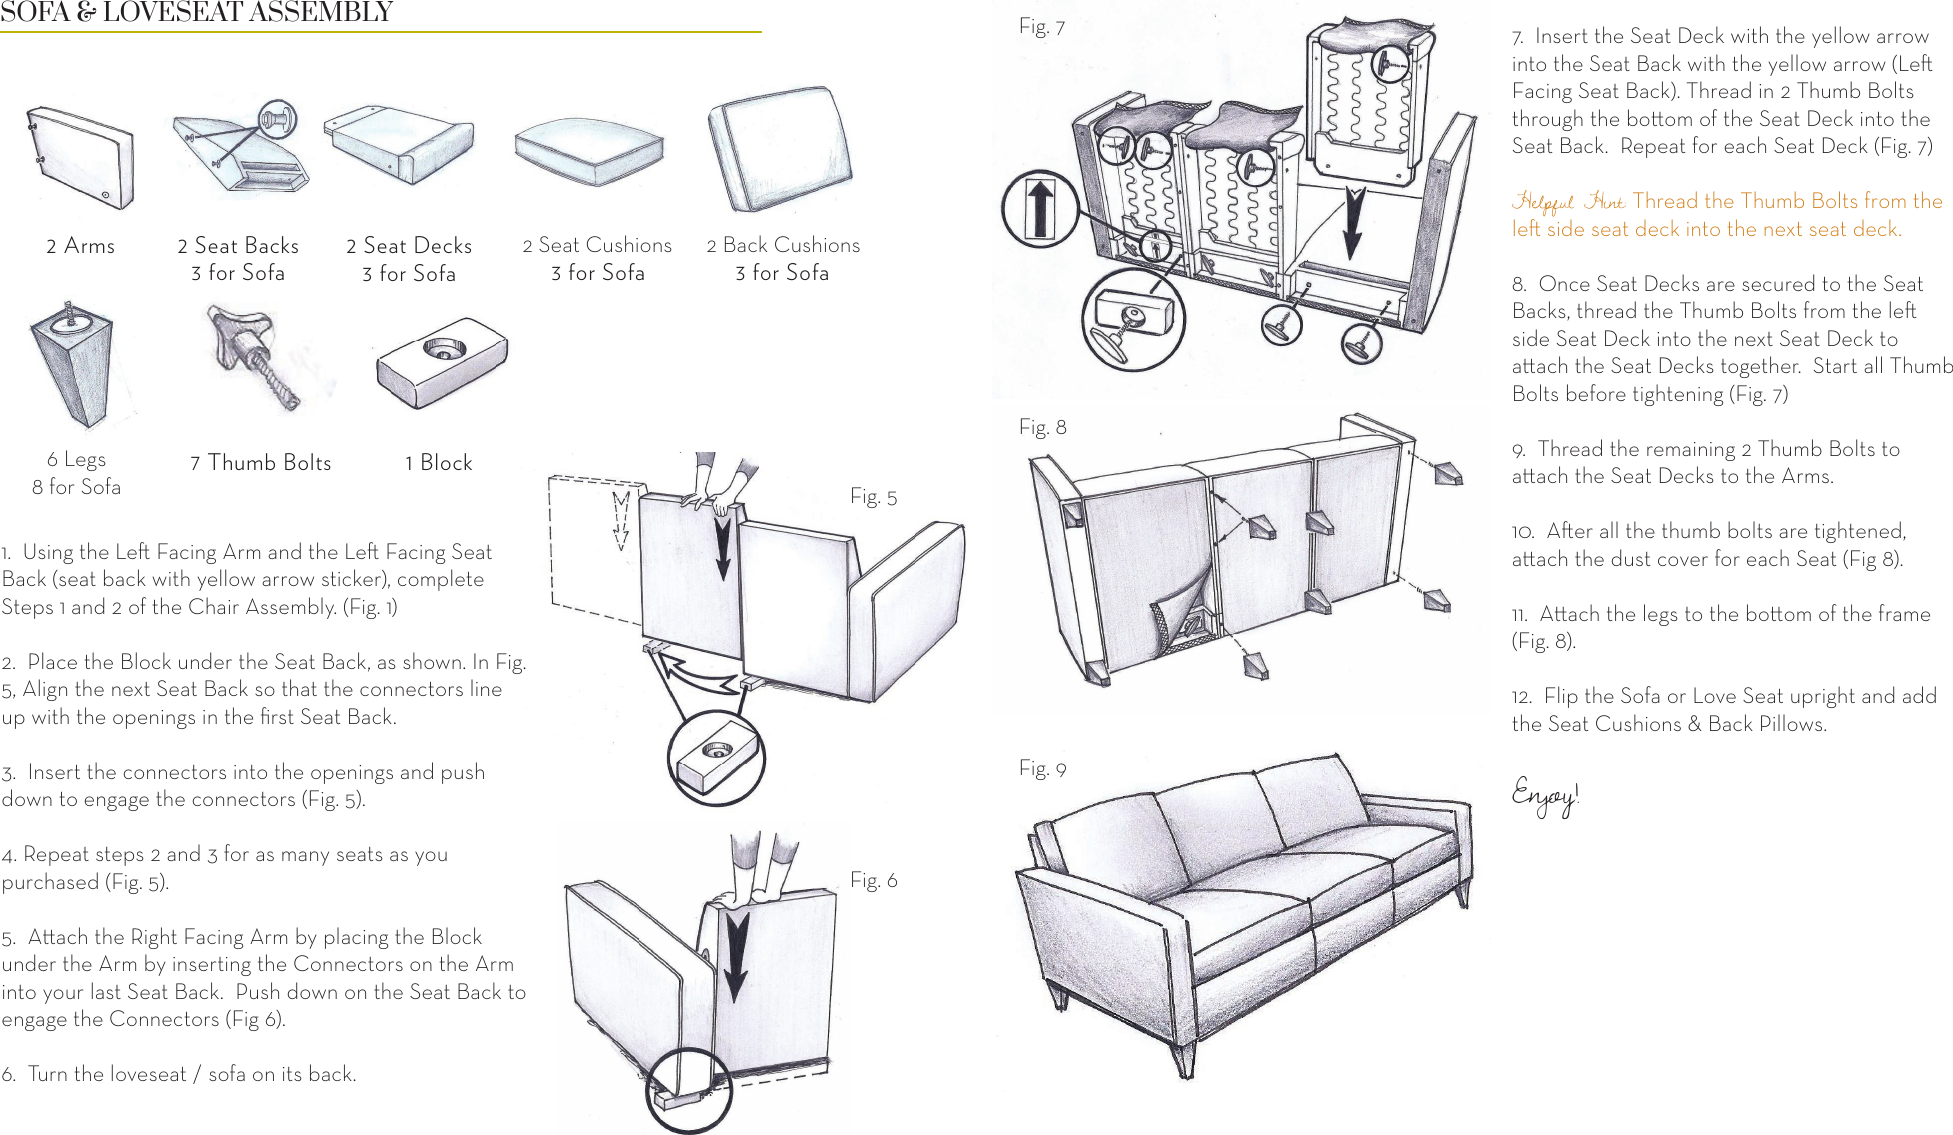 Page 1 of 1 - Sofa & Loveseat Assembly